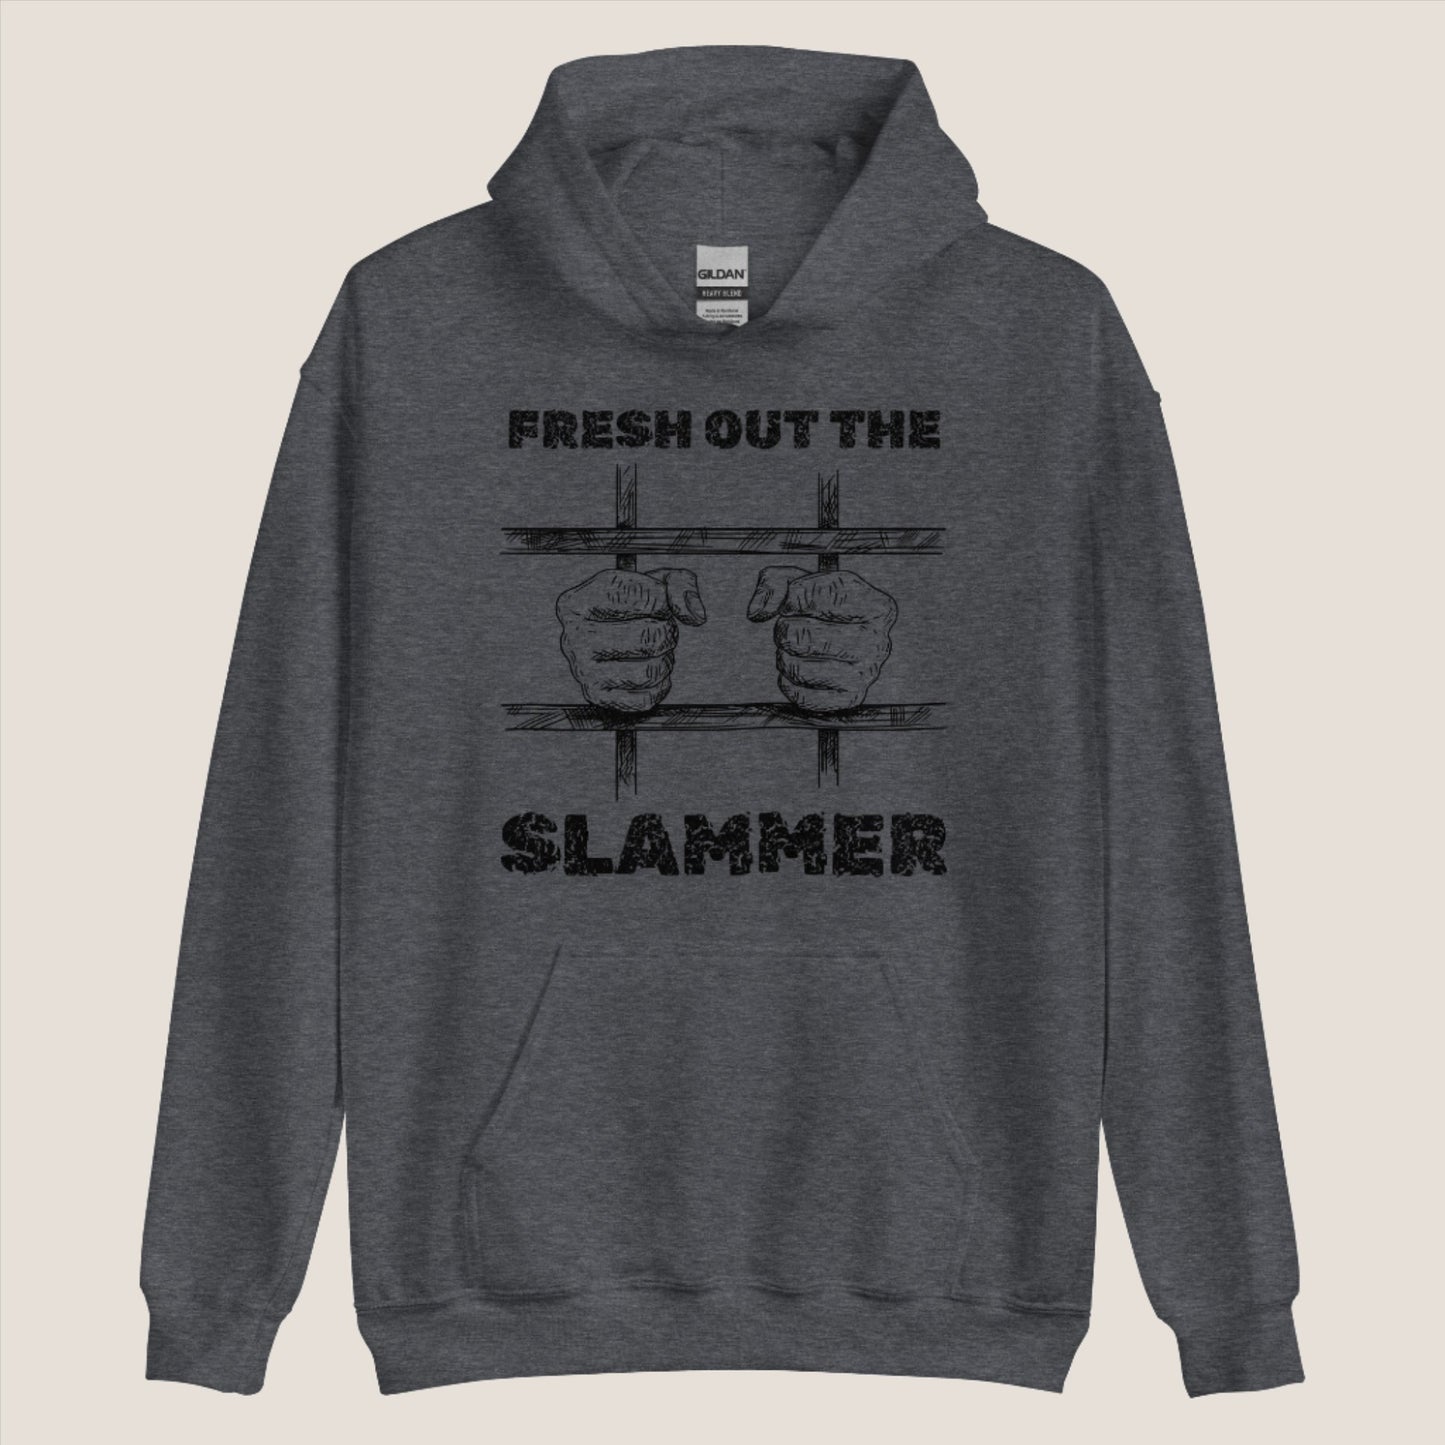 "Fresh out the Slammer" Taylor Swift inspired Unisex Hoodie // Delysia Designs